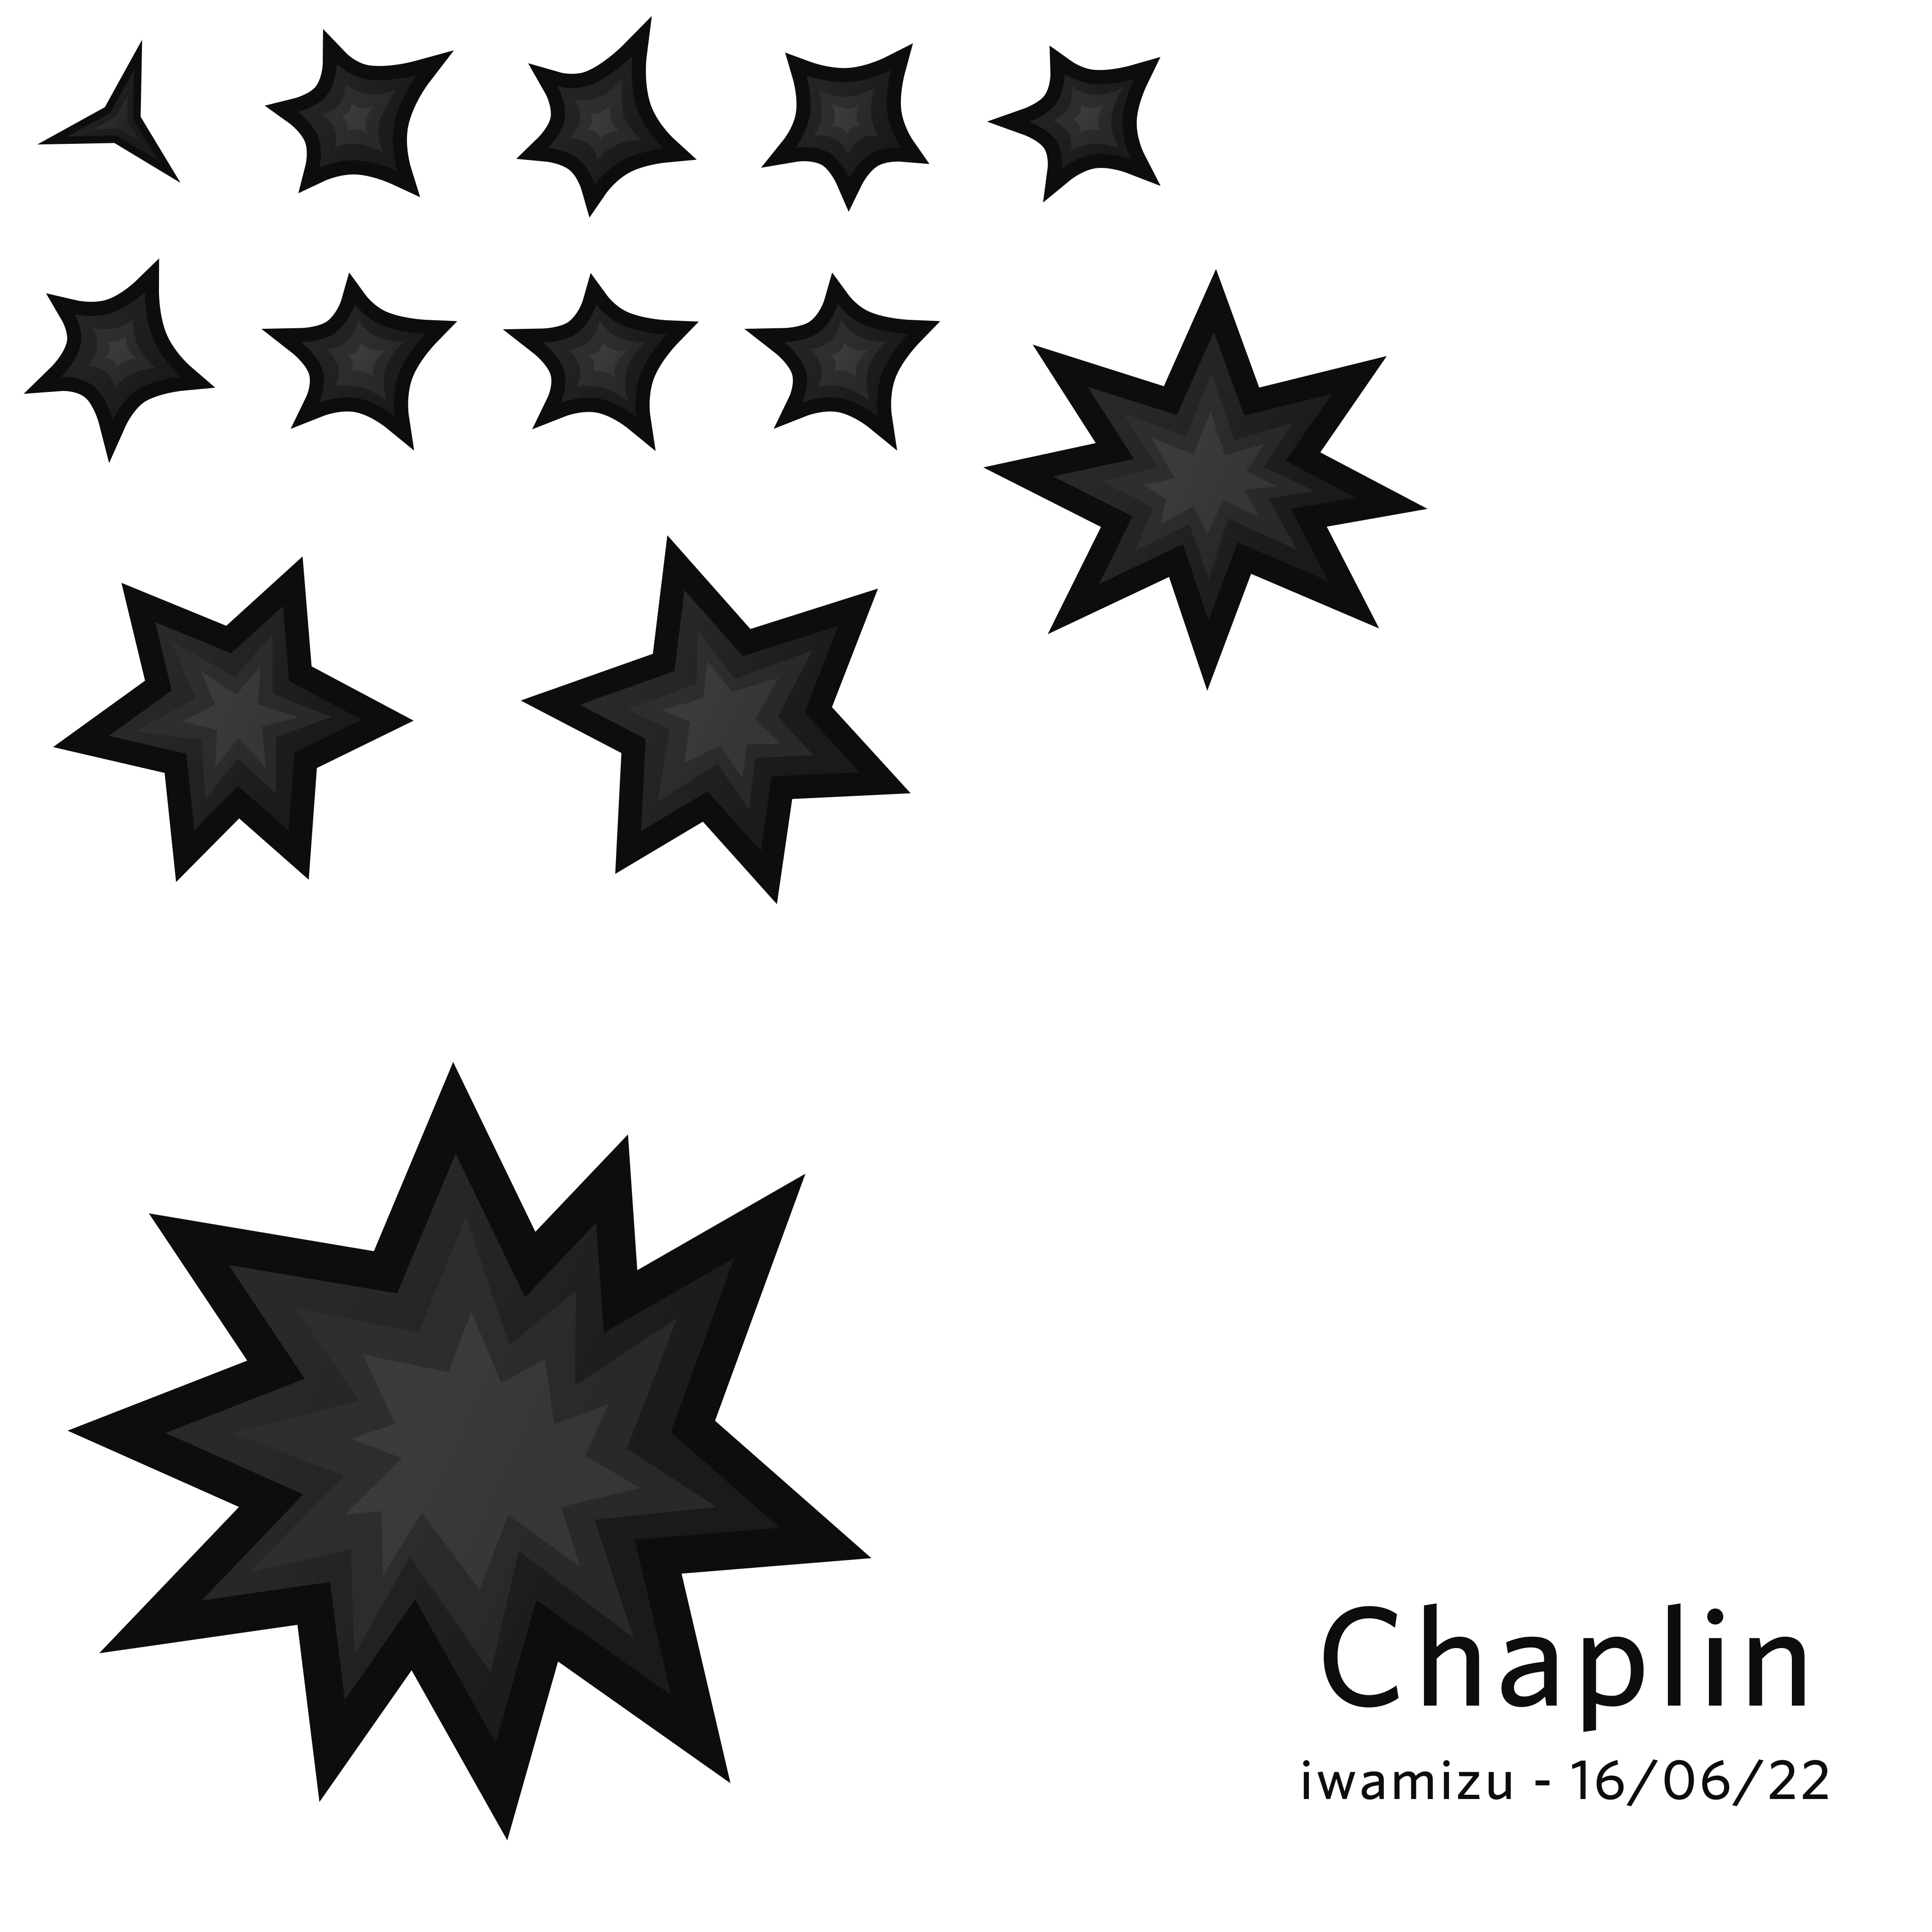 Chaplin Teeworlds particle